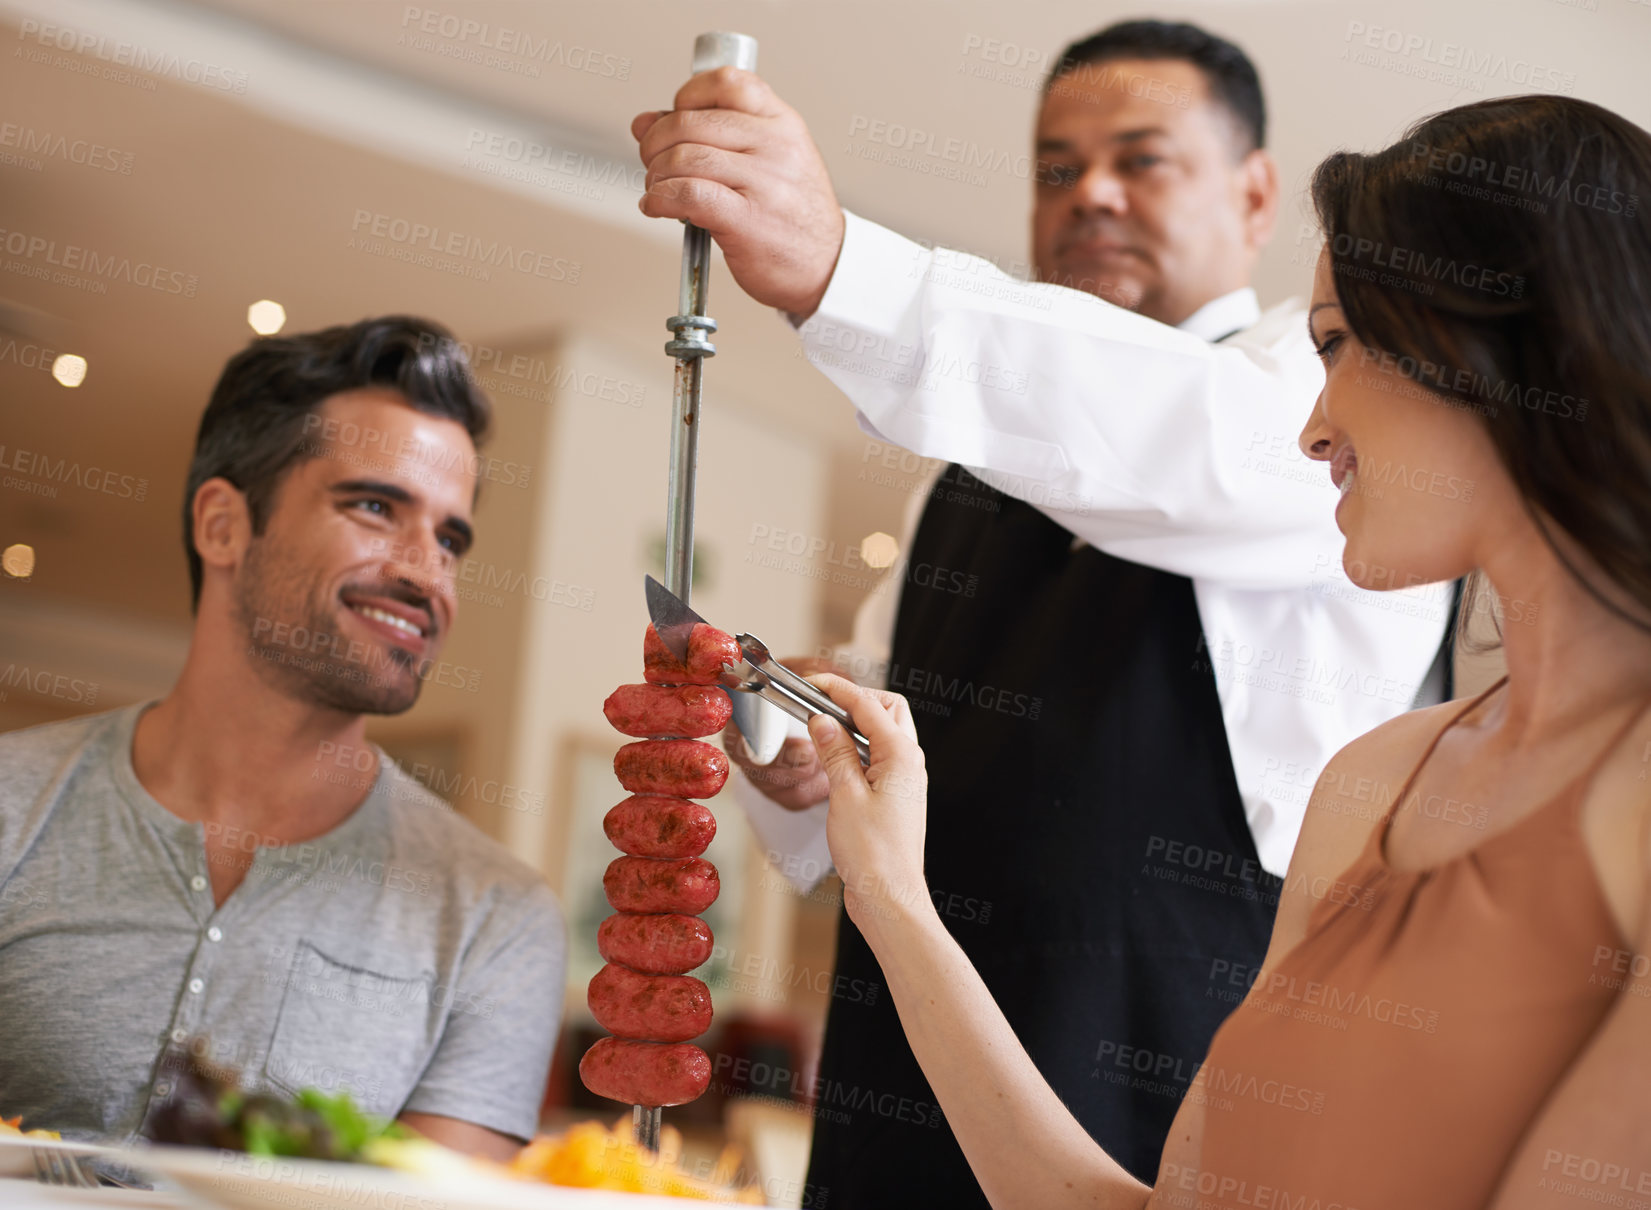 Buy stock photo Food, date and romance with couple in restaurant together for celebration or eating espetada. Love, meat or dinner with happy young man and woman in fine dining hospitality establishment for service